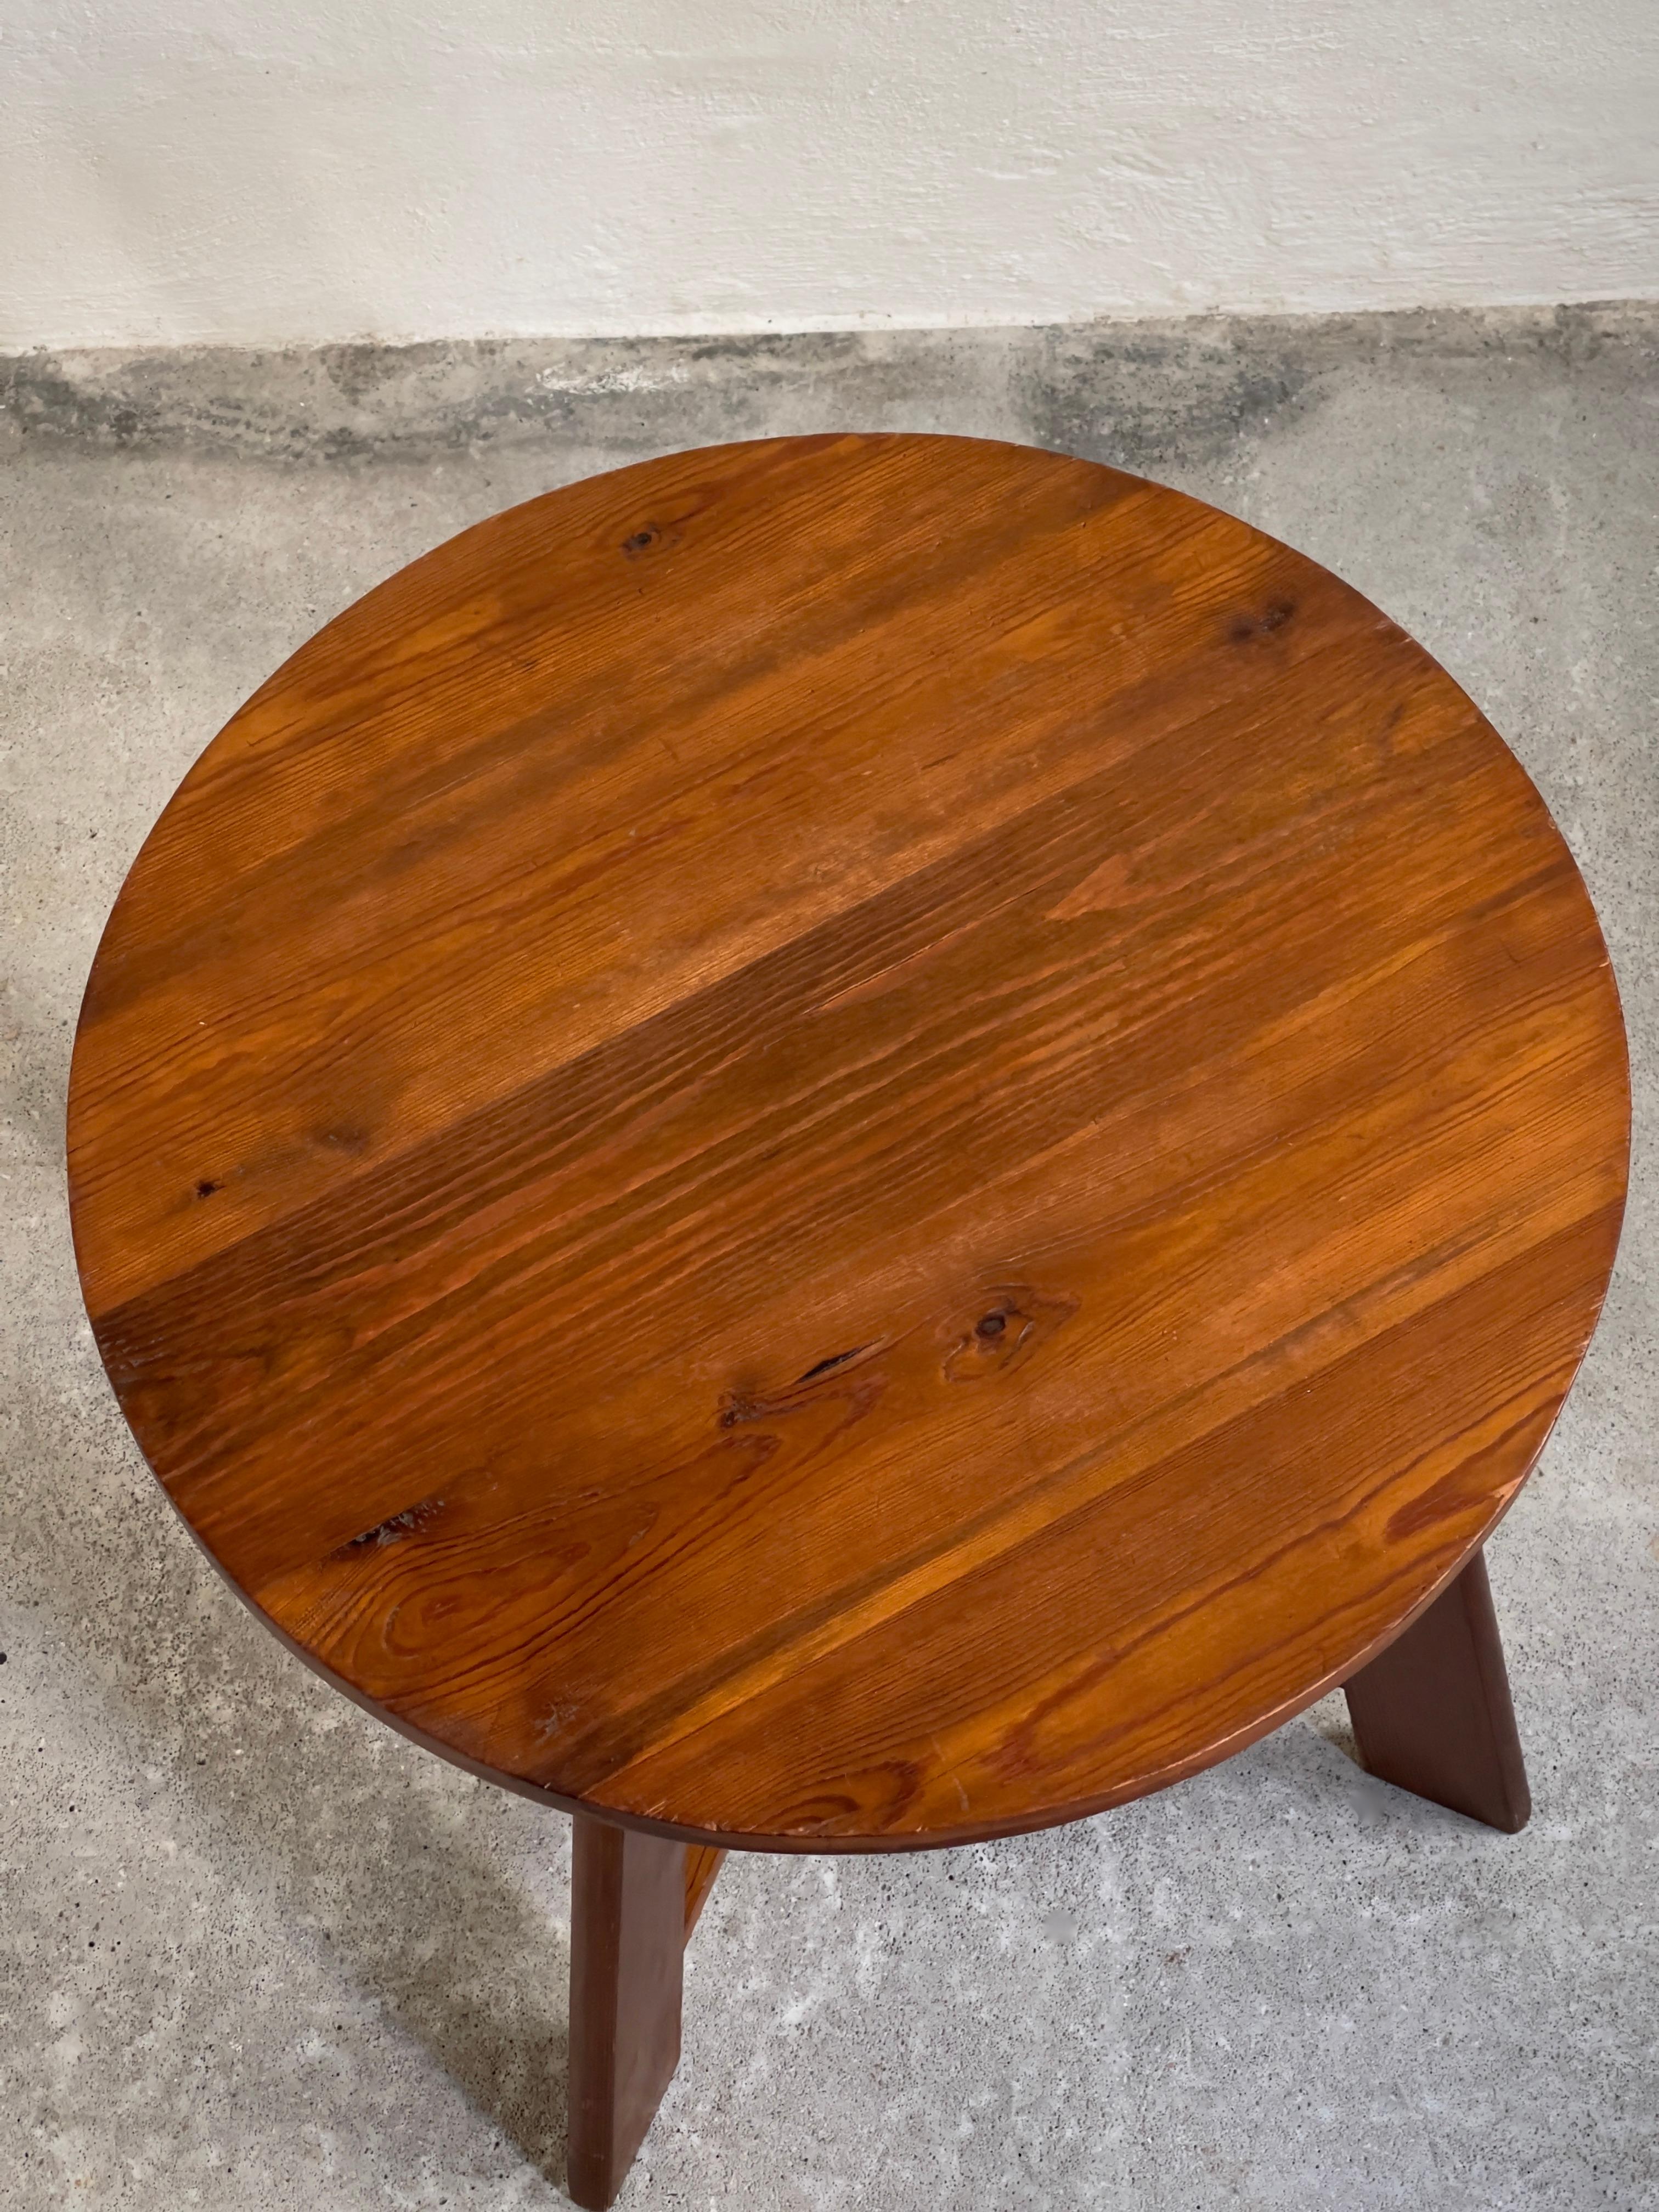 1930s Round Coffee Table in Deep Patinated Solid Pine from Danish Cabinet Maker For Sale 1